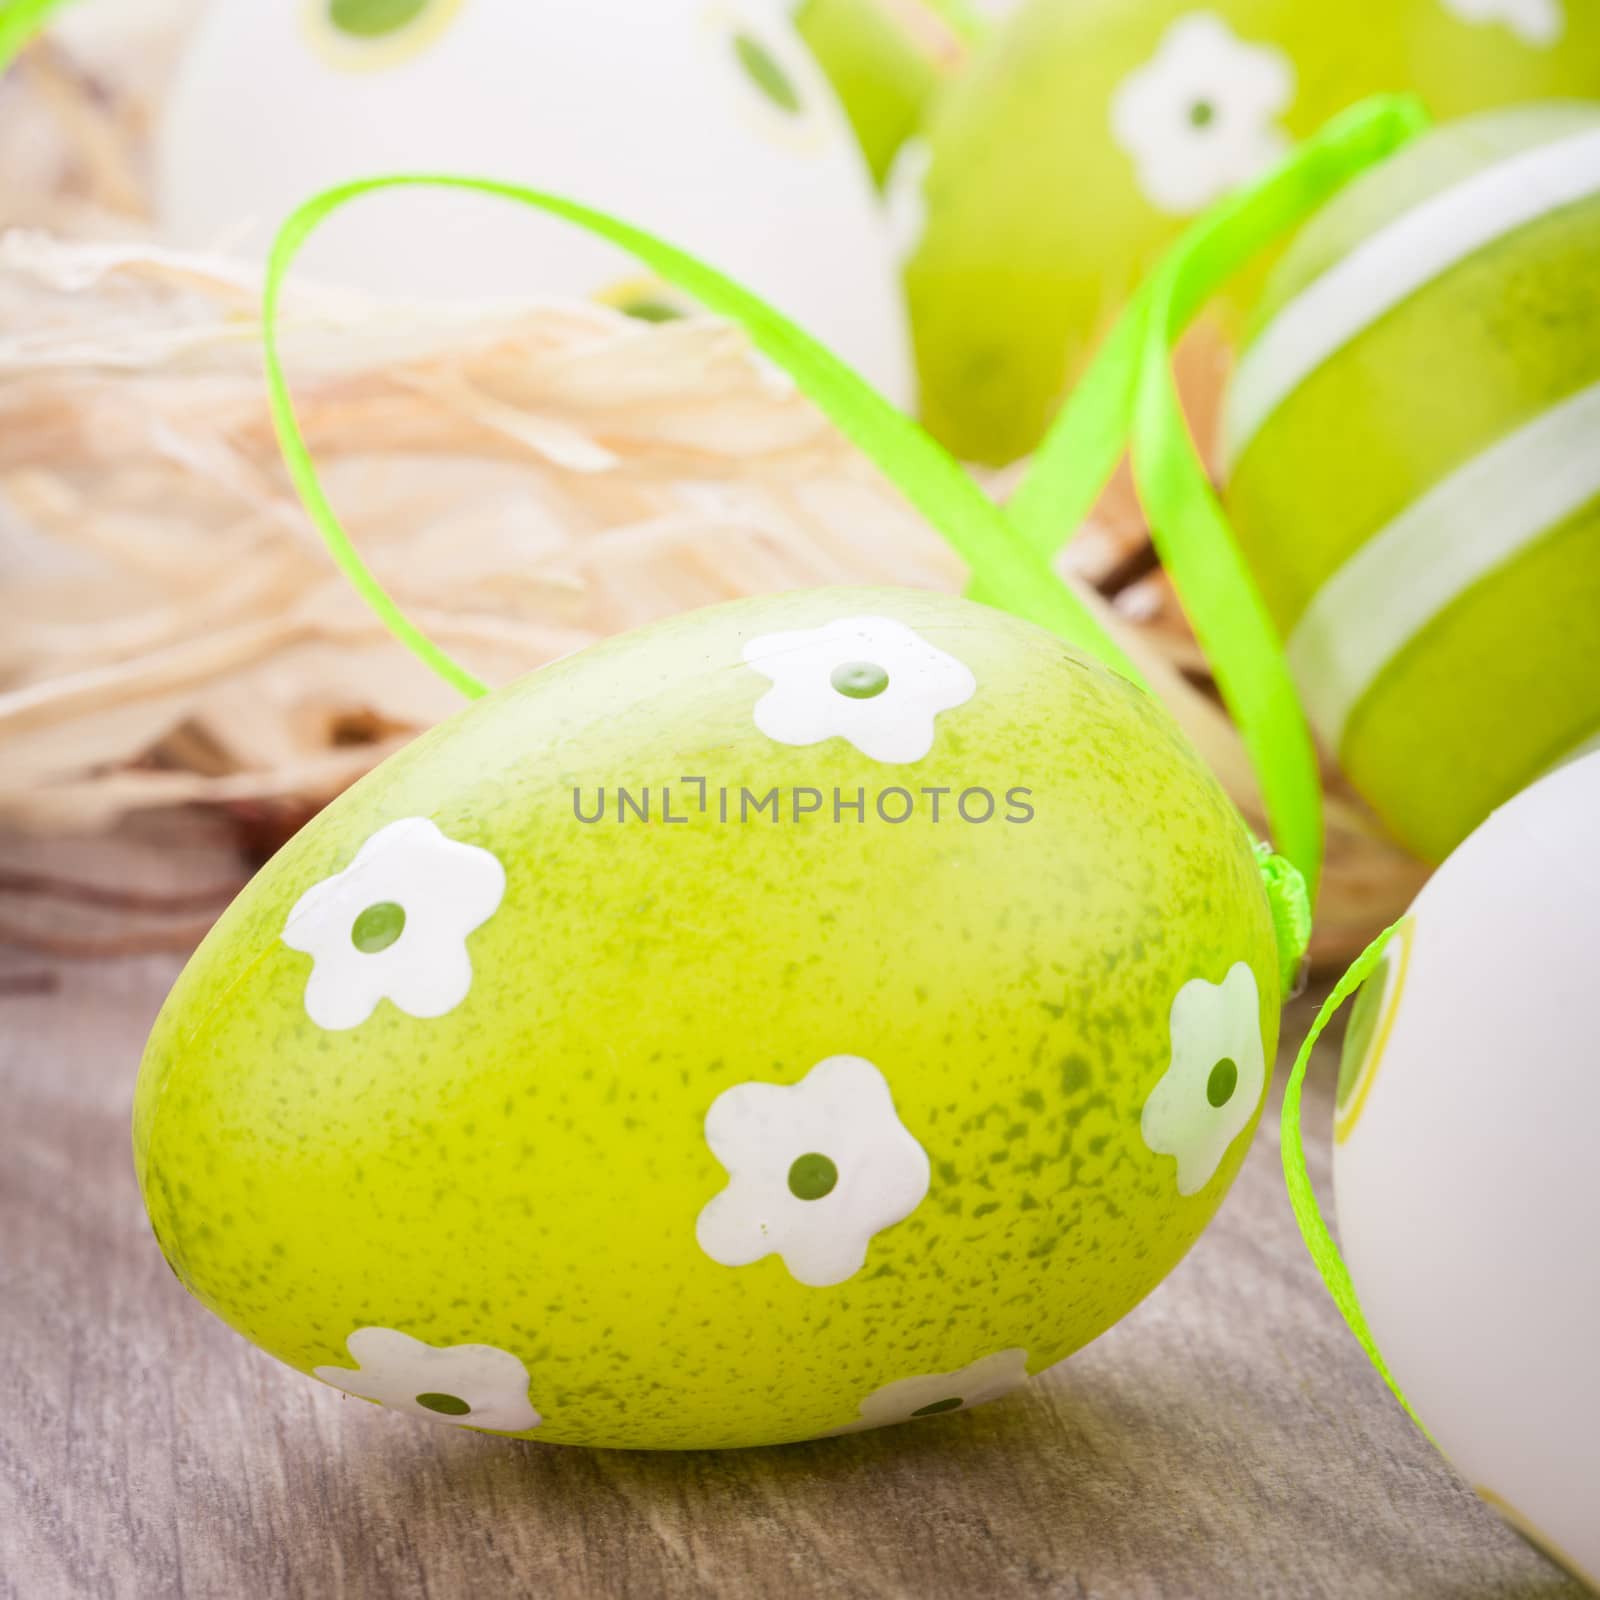 Collection of four hand decorated colourful green Easter eggs with different patterns displayed in straw, close up view